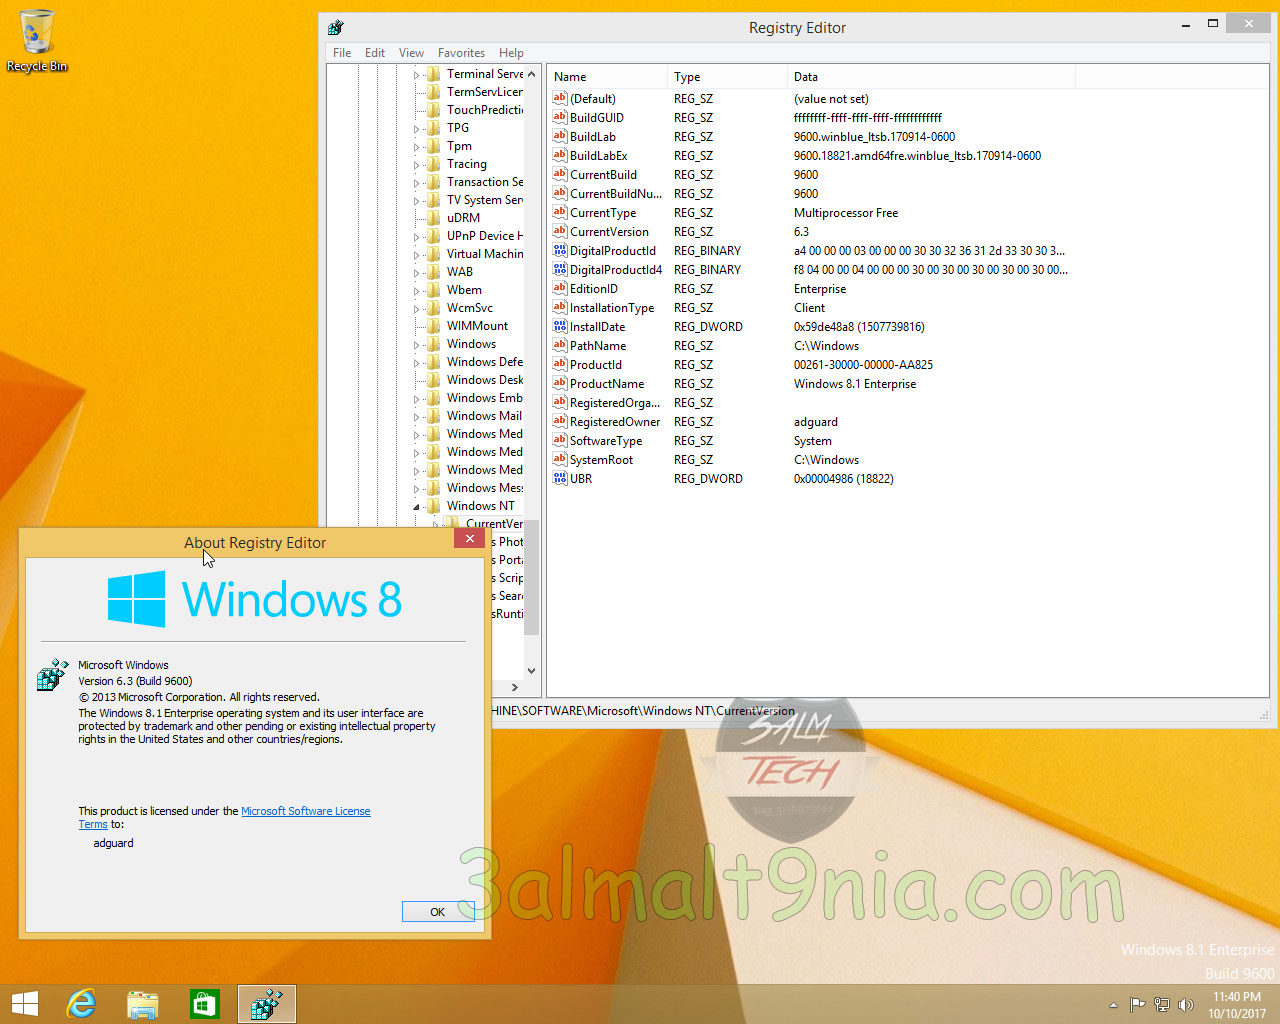 Windows 7-8.1-10 With Update (x86-x64) AIO [122in1] Adguard (v17 Free Downloadl